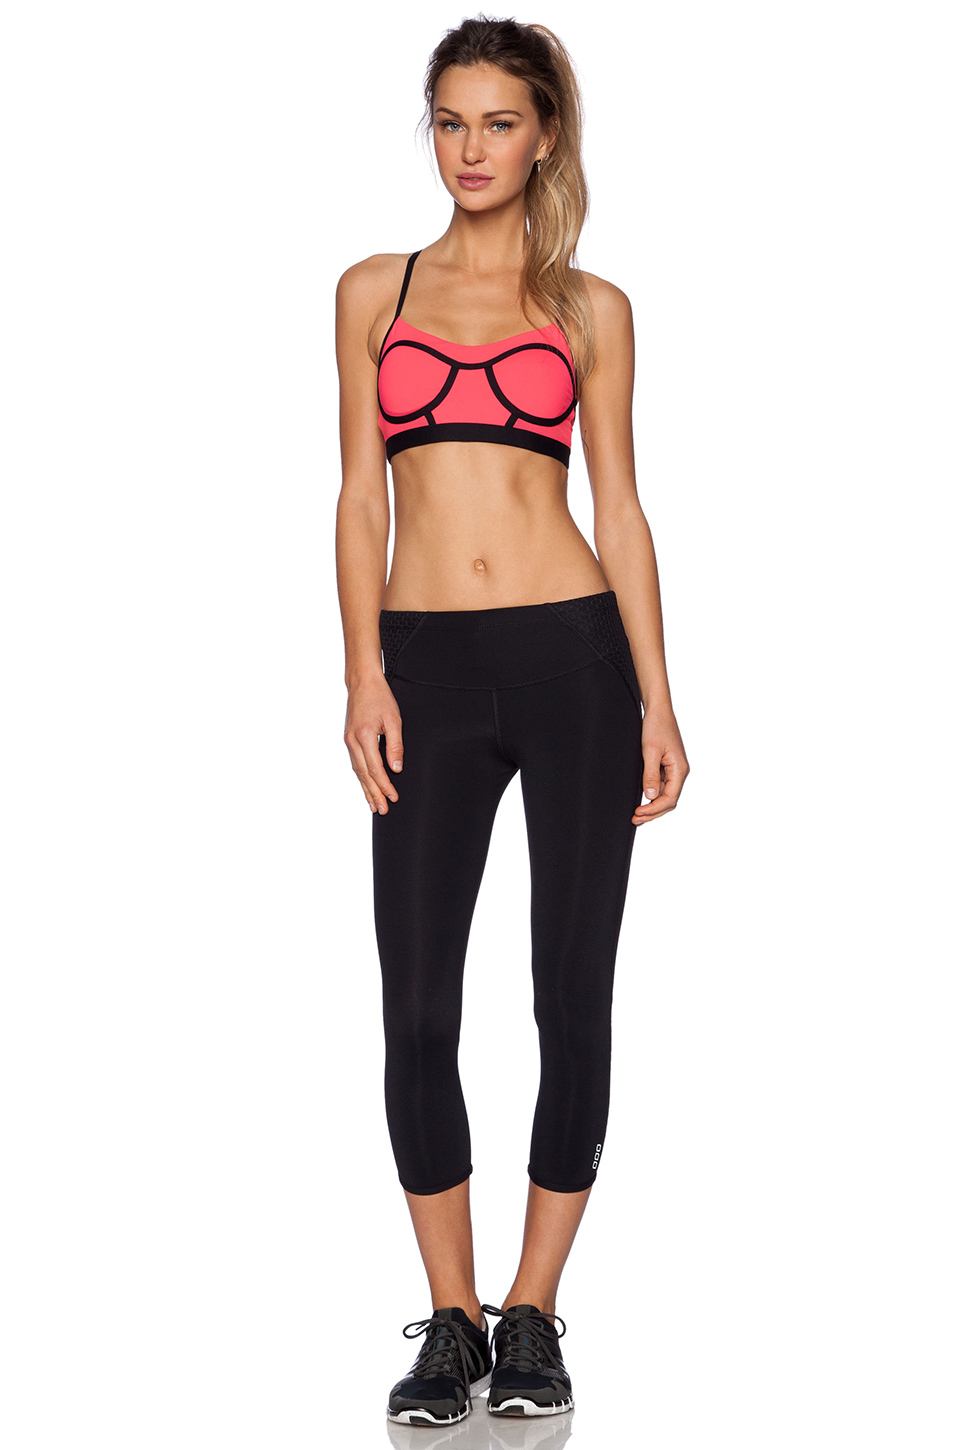 Ladies' sports wear bra top and leggings multi colors available